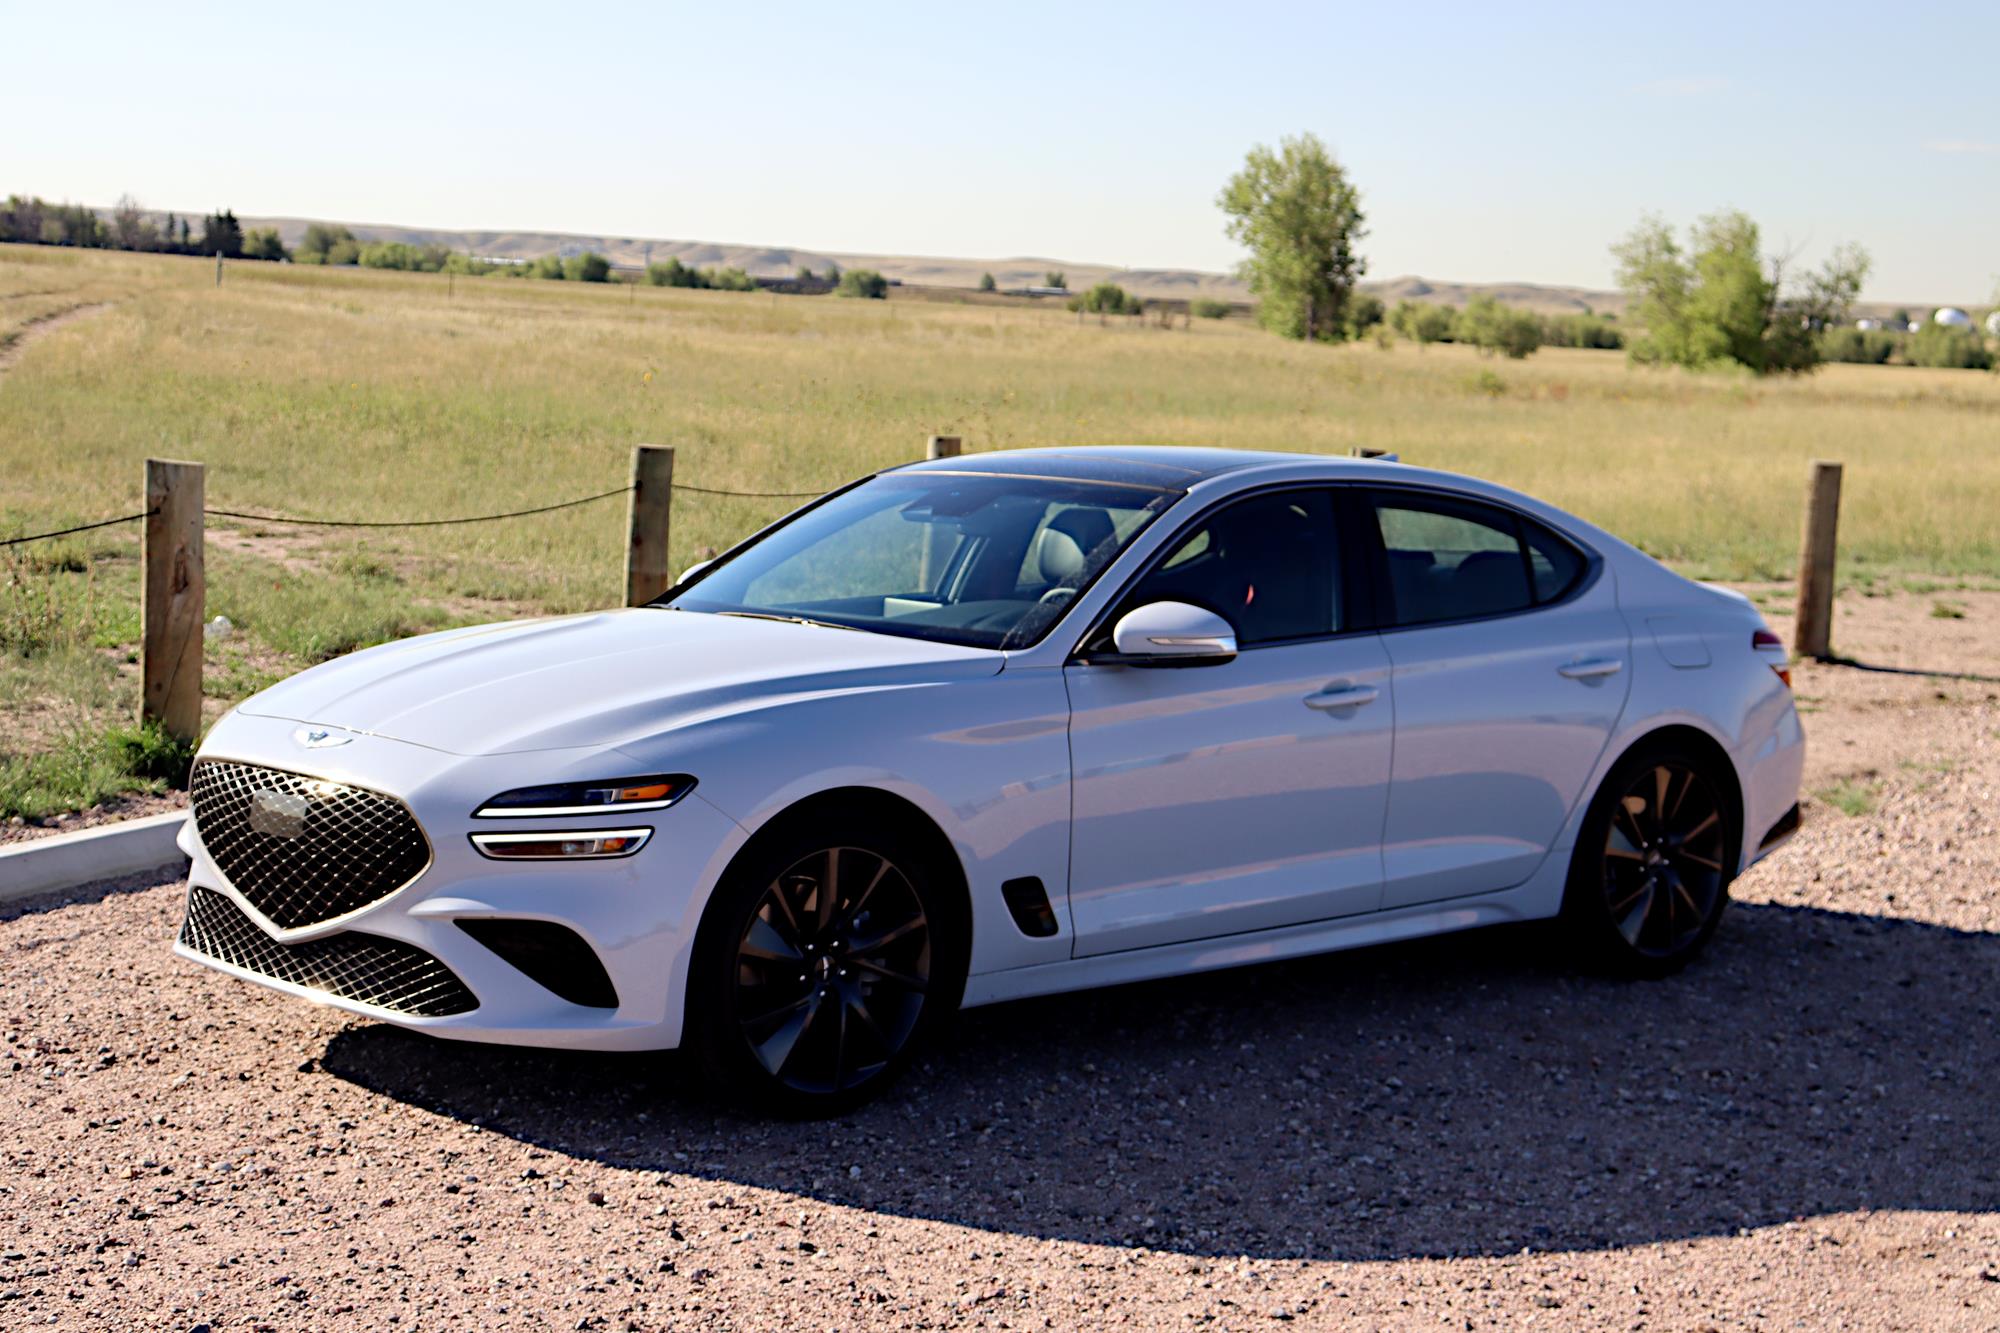 2022 Genesis G70 Is the New Best of Breed